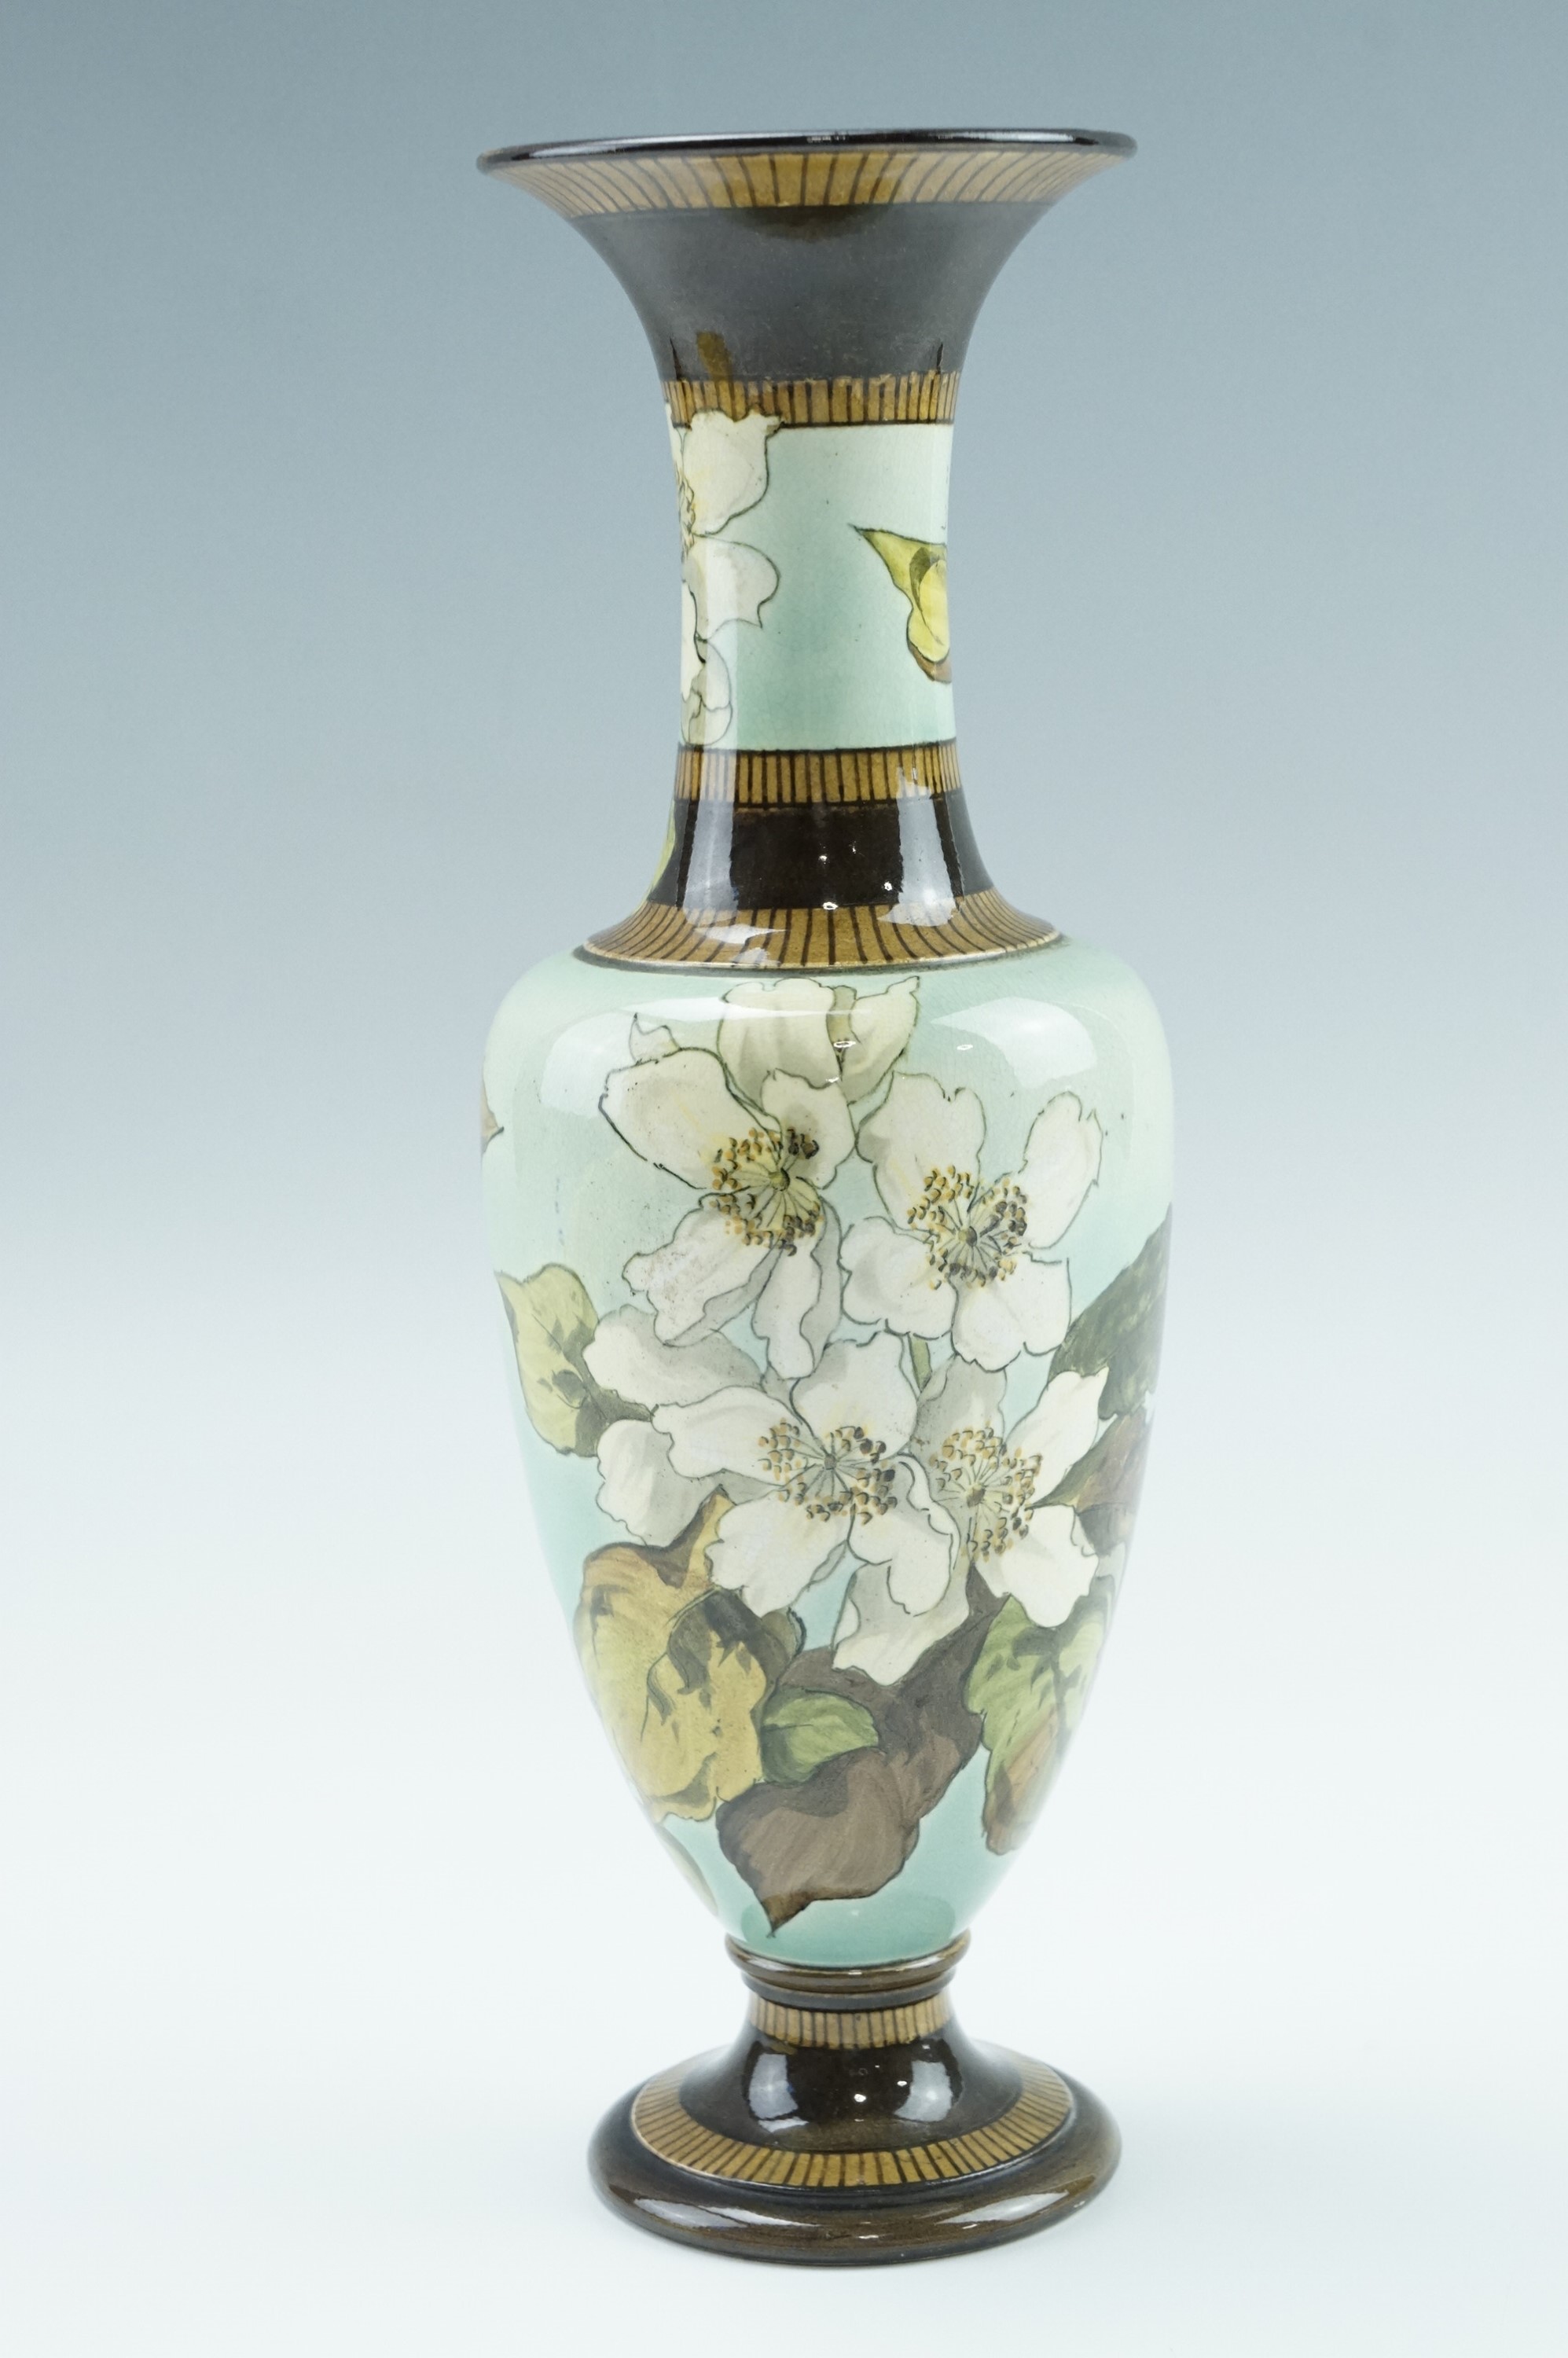 A late 19th Century Doulton Lambeth Faience vase, of slender urn form having an elongated neck and